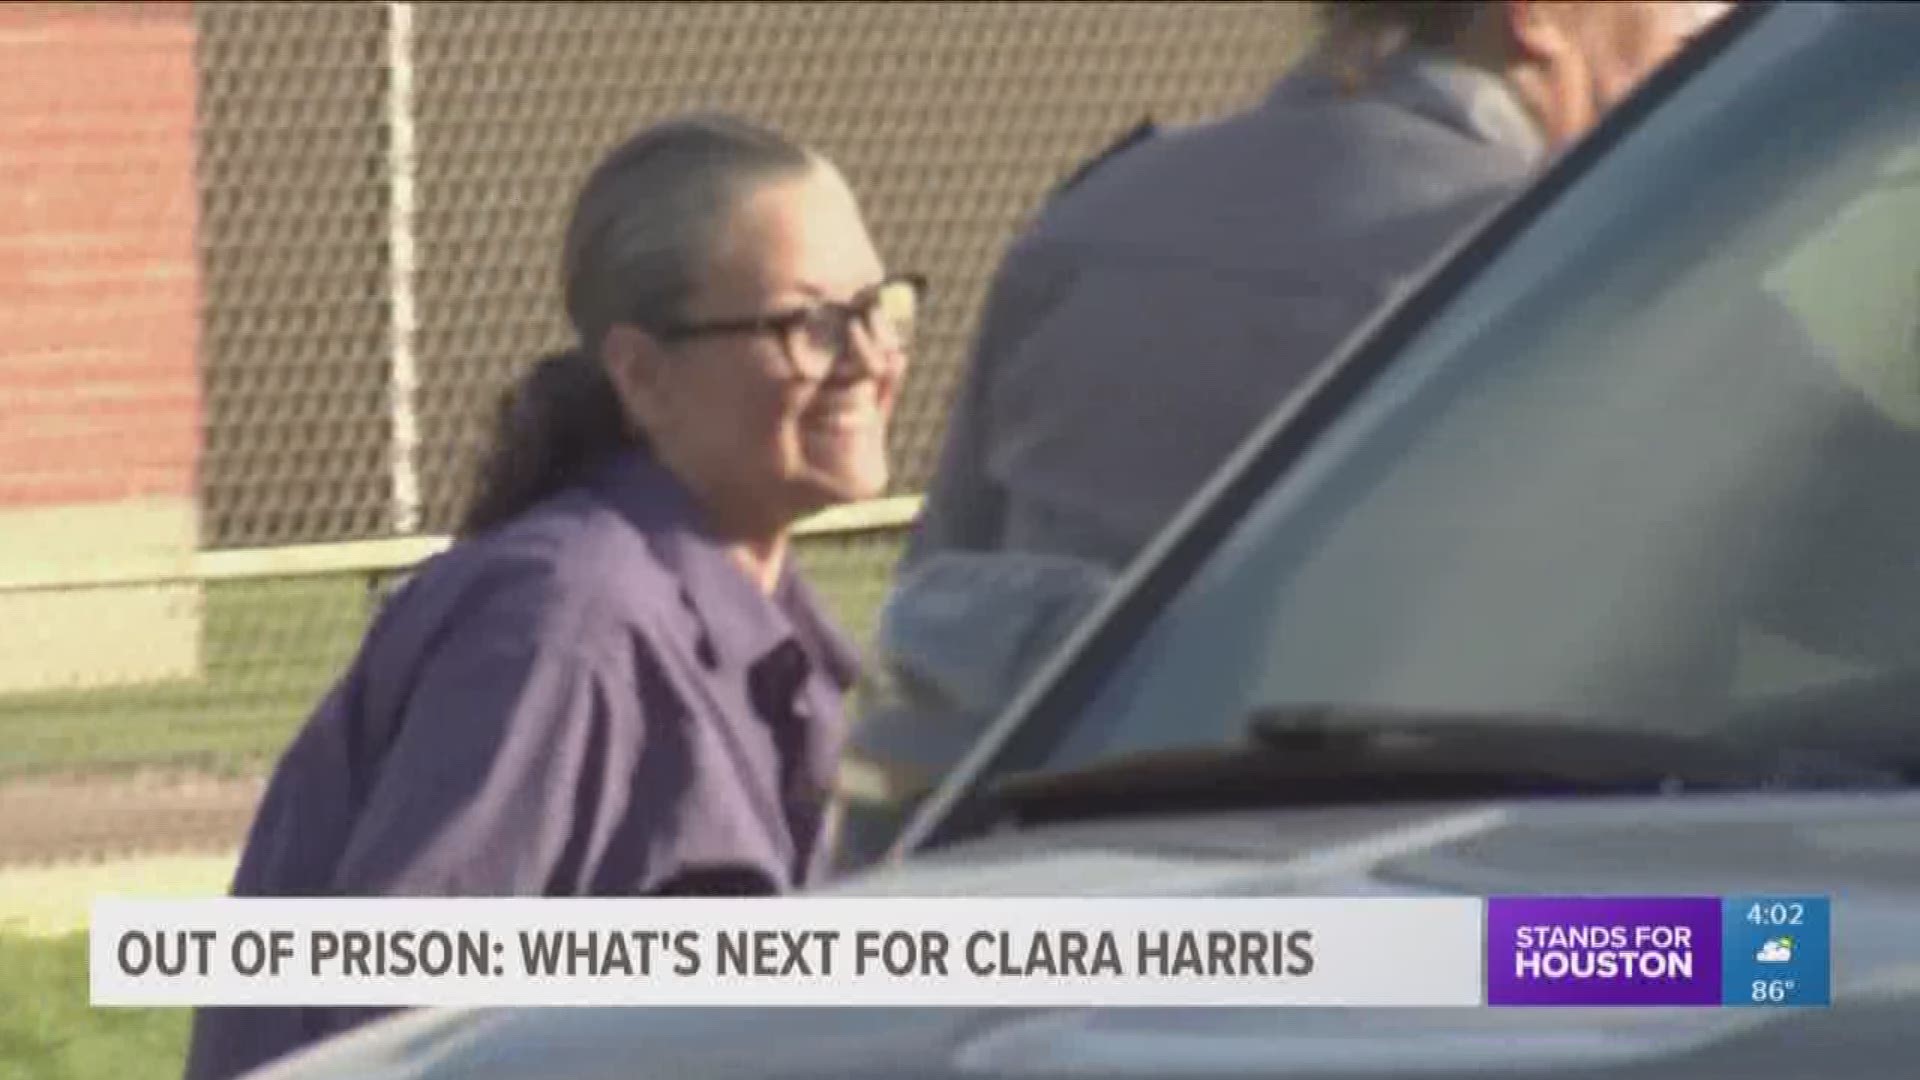 Clara Harris was raising her family in Friendswood before she was convicted of killing her husband back in 2002. On Thursday, friends from her old neighborhood picked Harris up from prison to start the next chapter of her life.